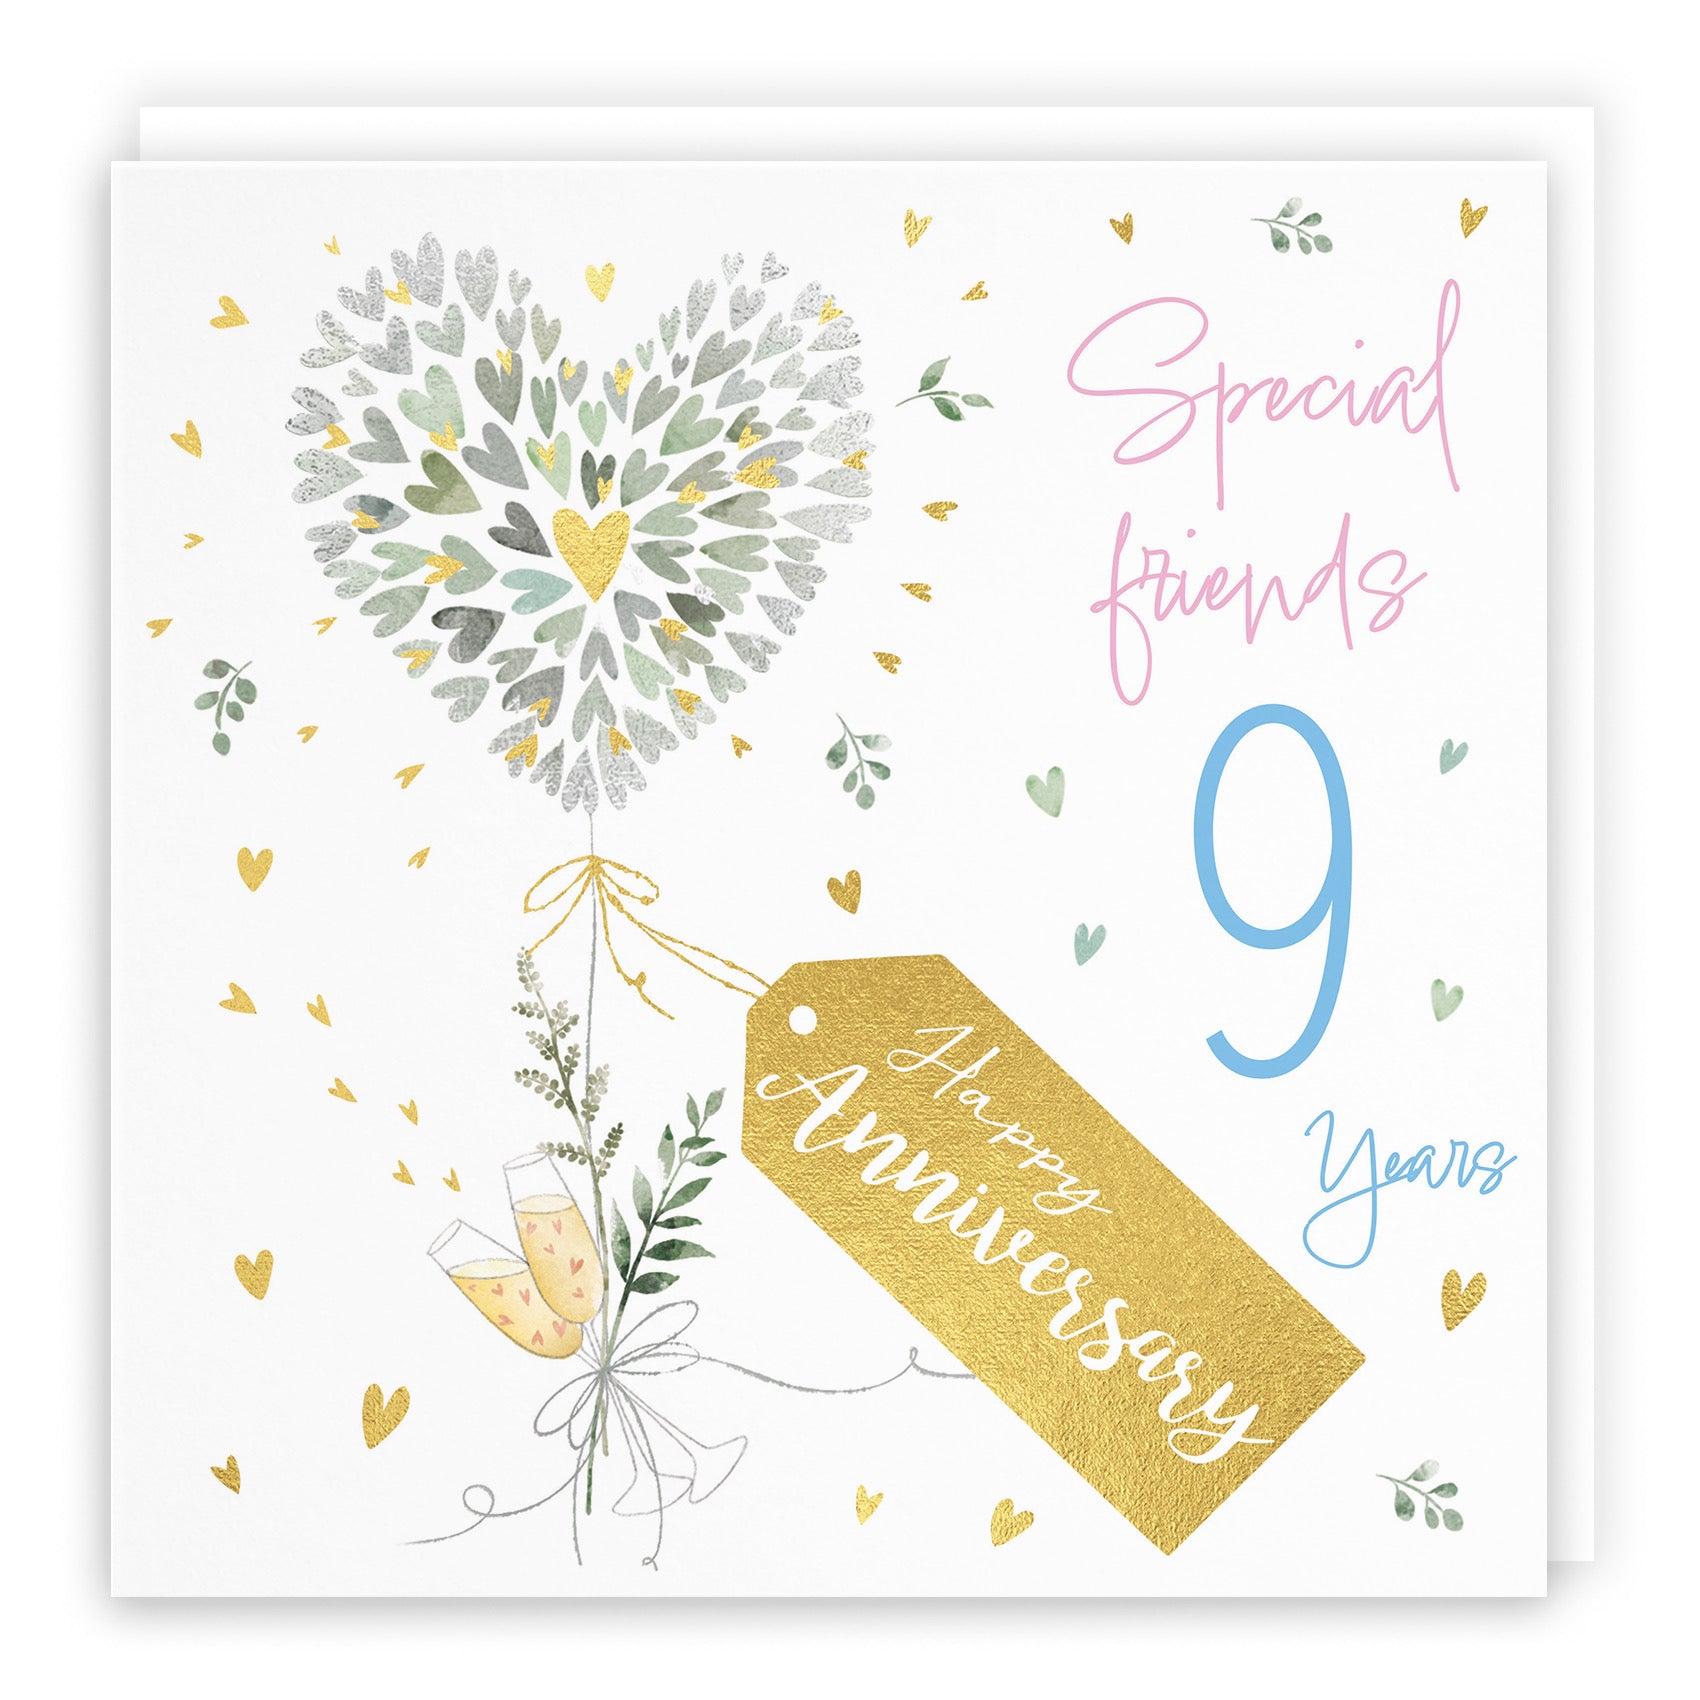 Special Friends 9th Anniversary Card Contemporary Hearts Milo's Gallery - Default Title (B0CKJ7HWYZ)